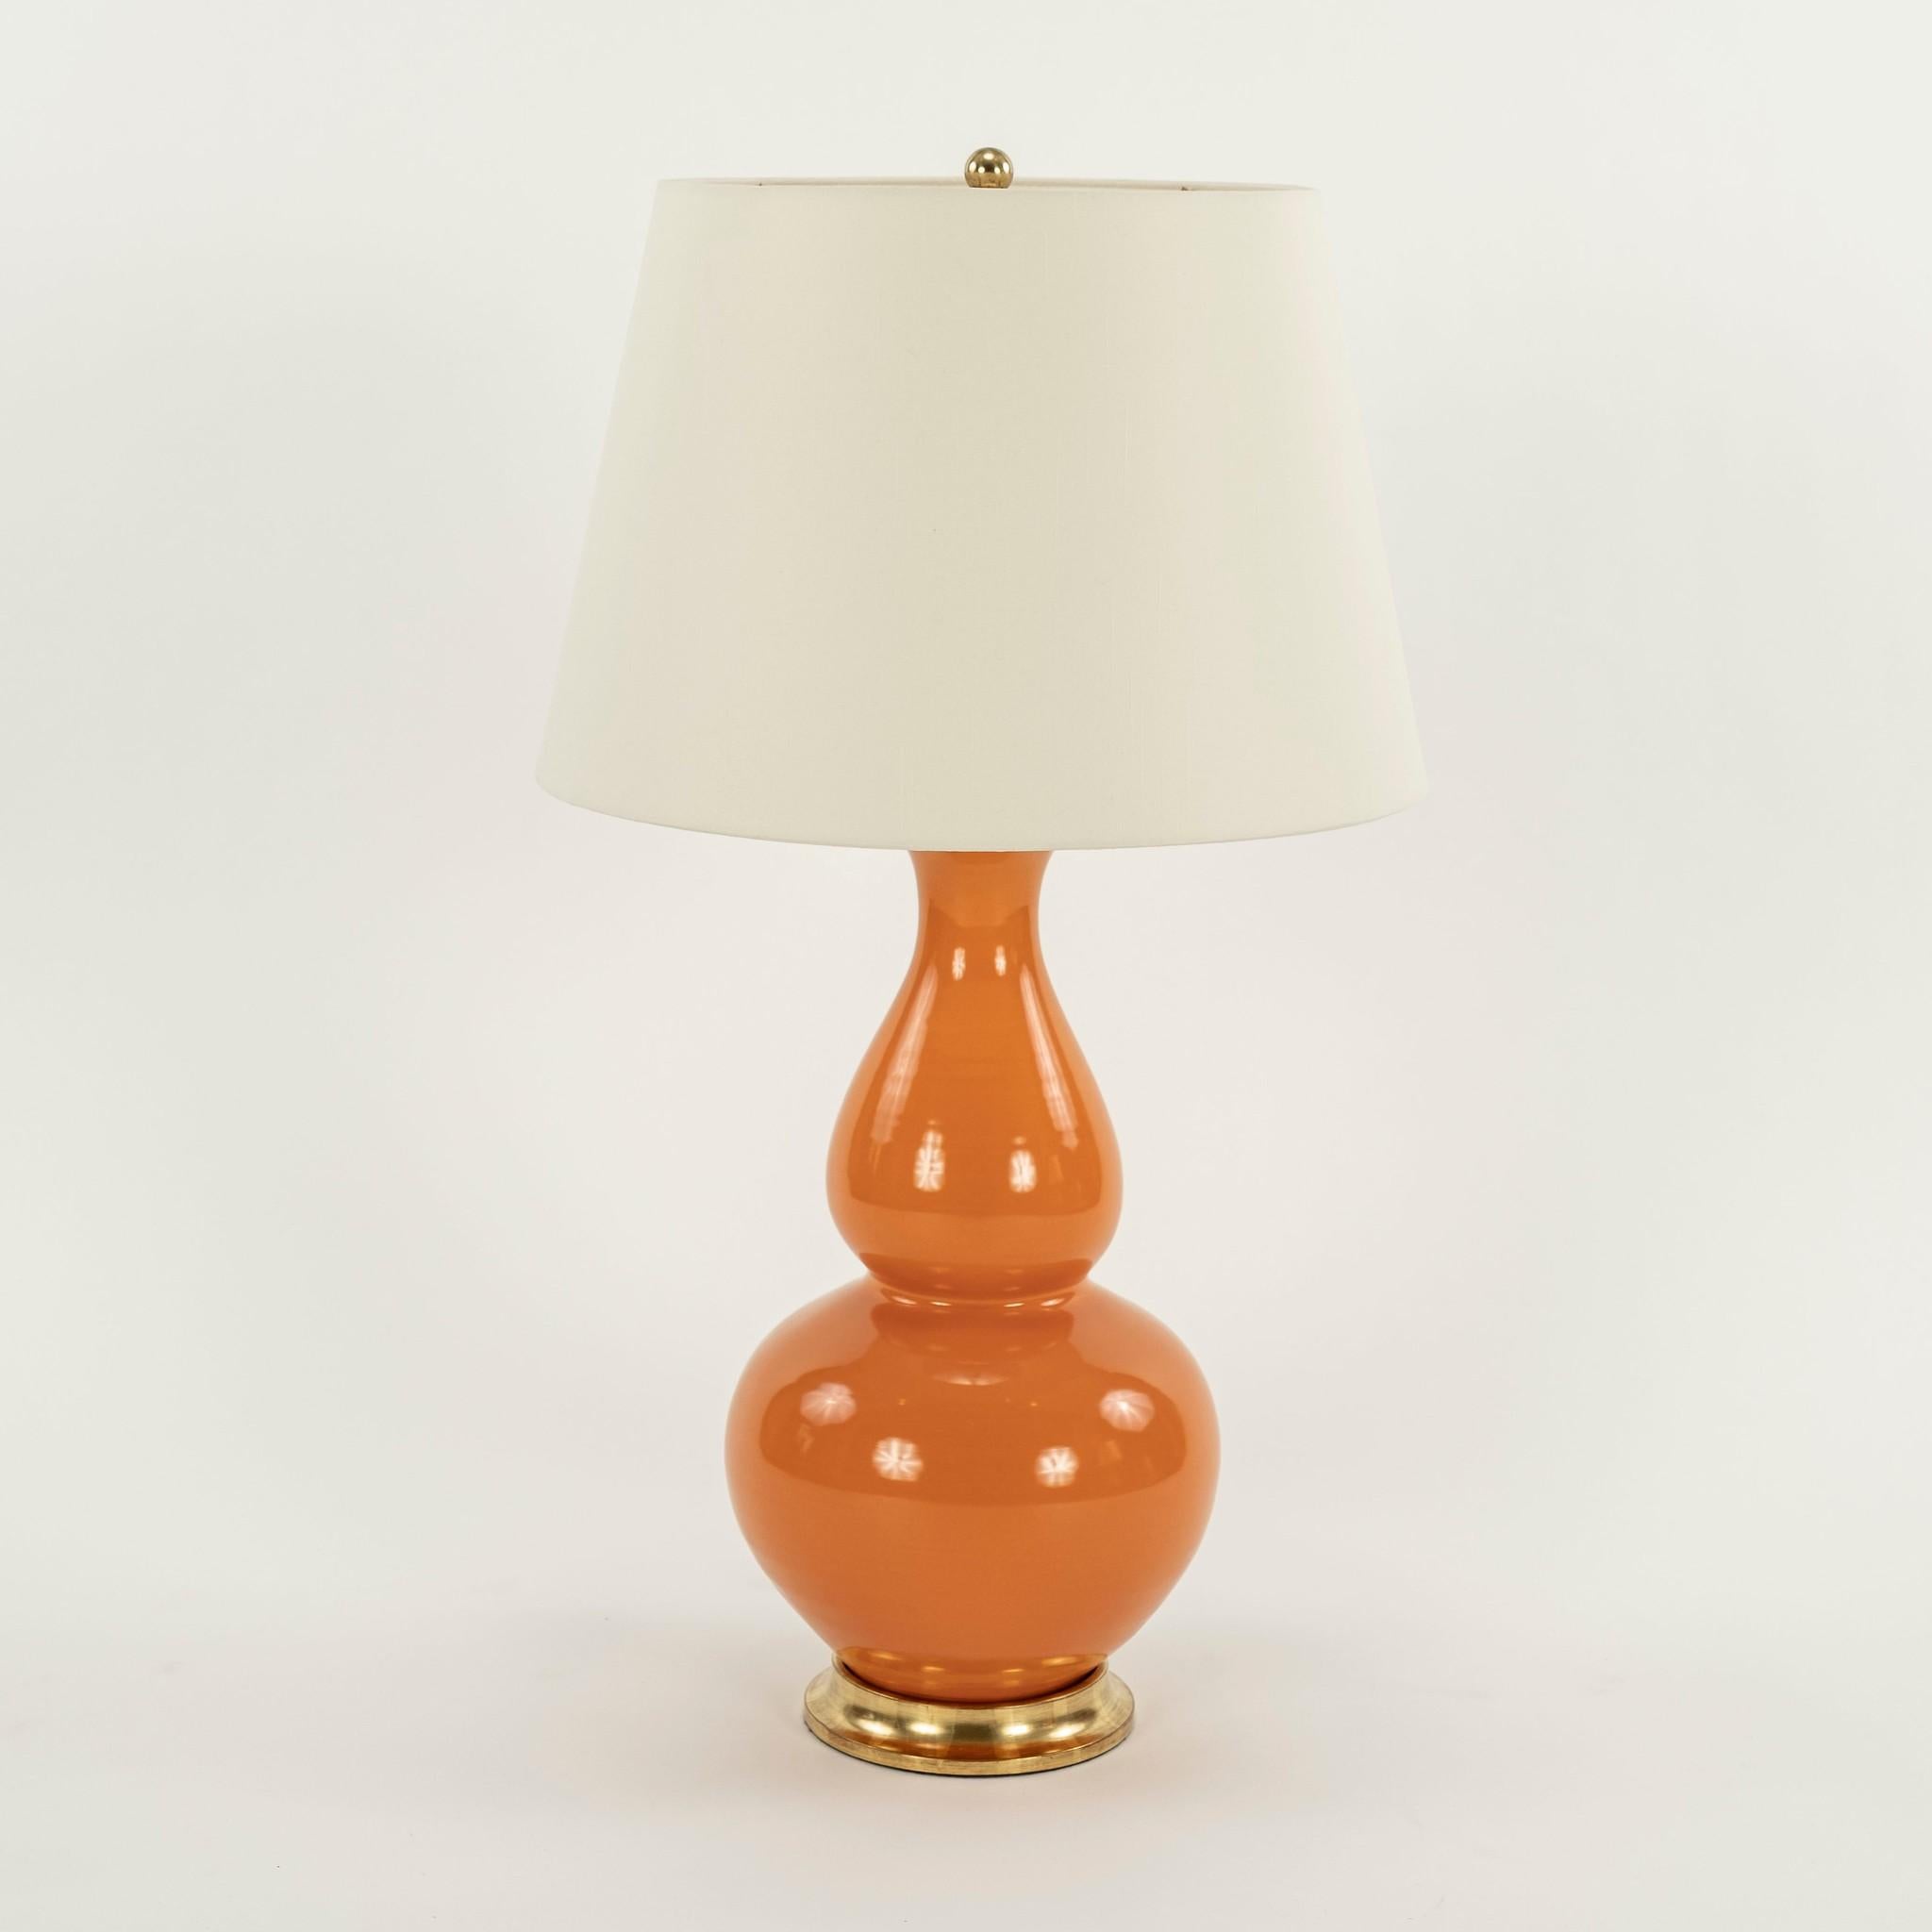 Pair of Christopher Spitzmiller table lamps: Aurora ceramic double gourd with 23K water gilt base, brass cap and silk shades